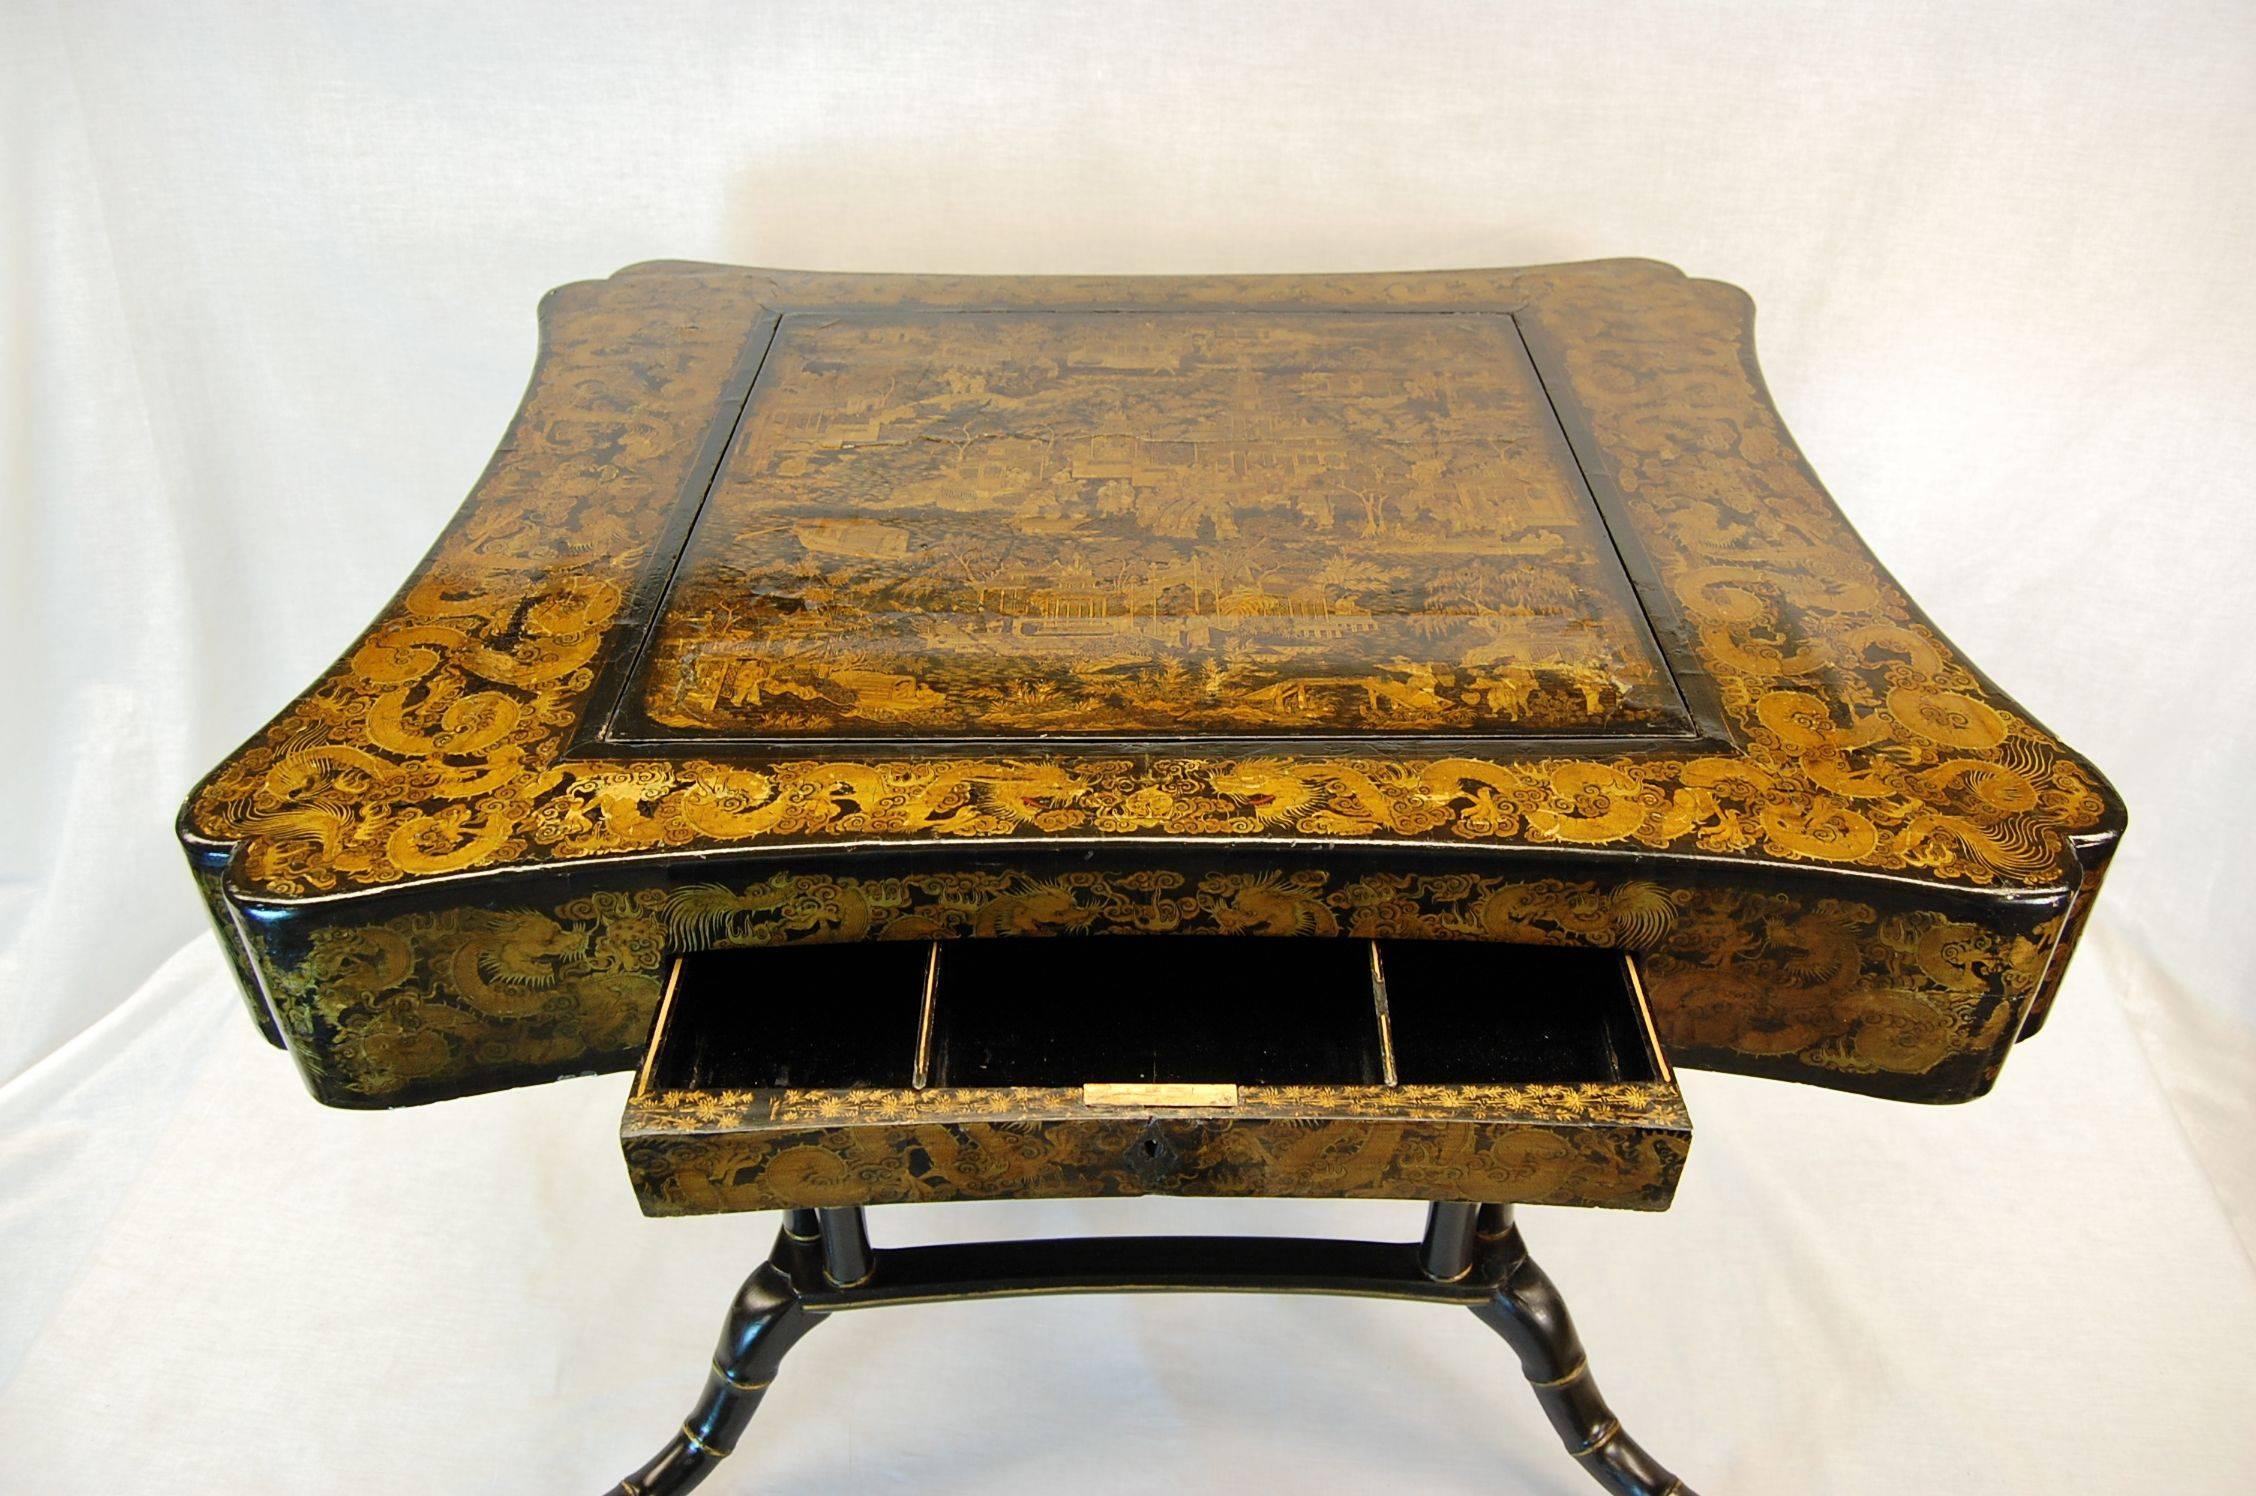 Rectangular Japanese decorated games table with reversible top, the checker board is inlaid with mother of pearl. The faux bamboo black painted and gold decorated base was added mid 20th century, the table originally had a pedestal base and may have